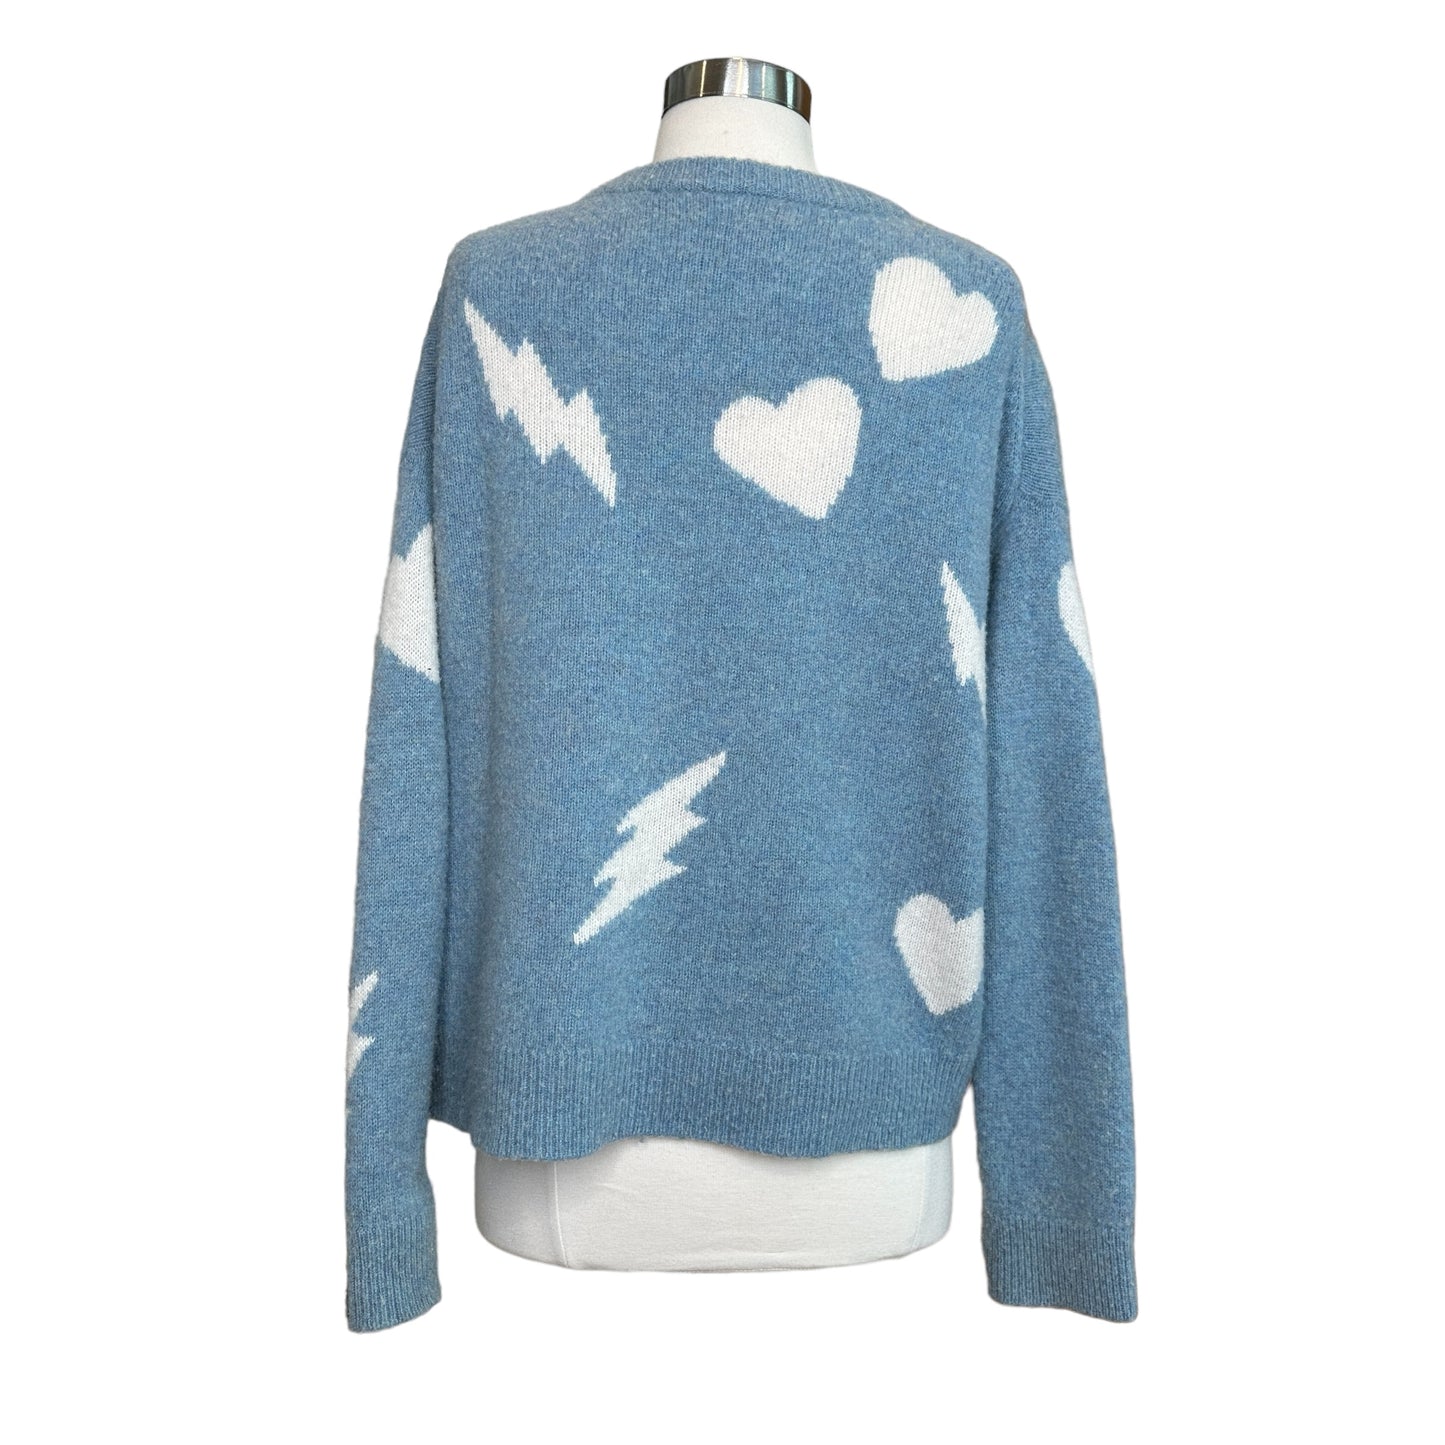 Blue Printed Cashmere Sweater - XS